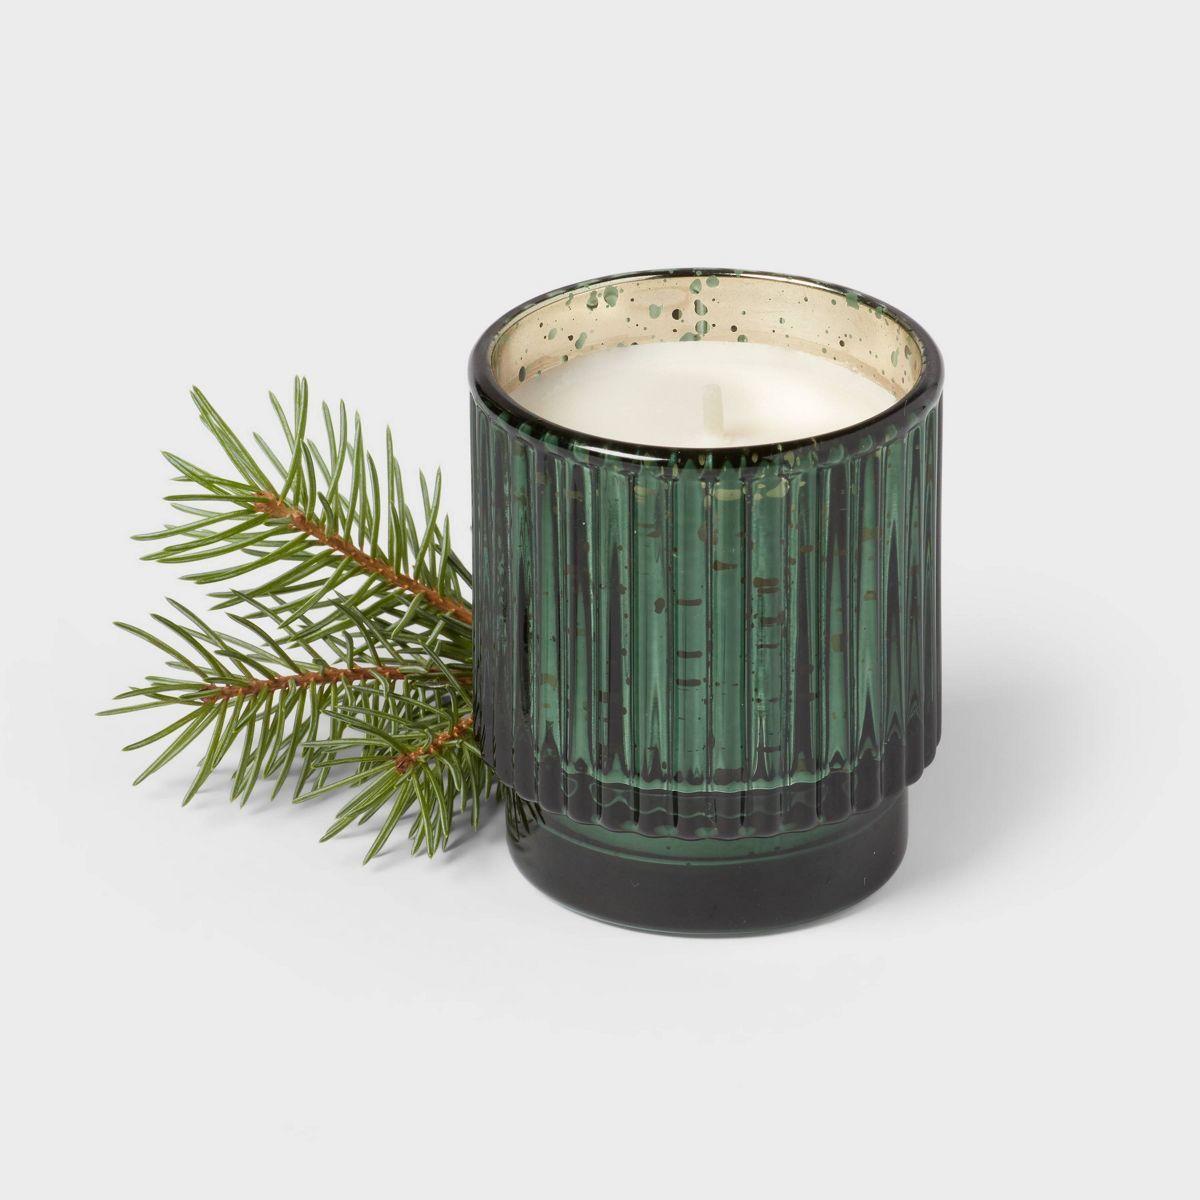 4oz Mercury Footed Ribbed Glass with Dustcover Green/Forest Fir - Threshold™ | Target